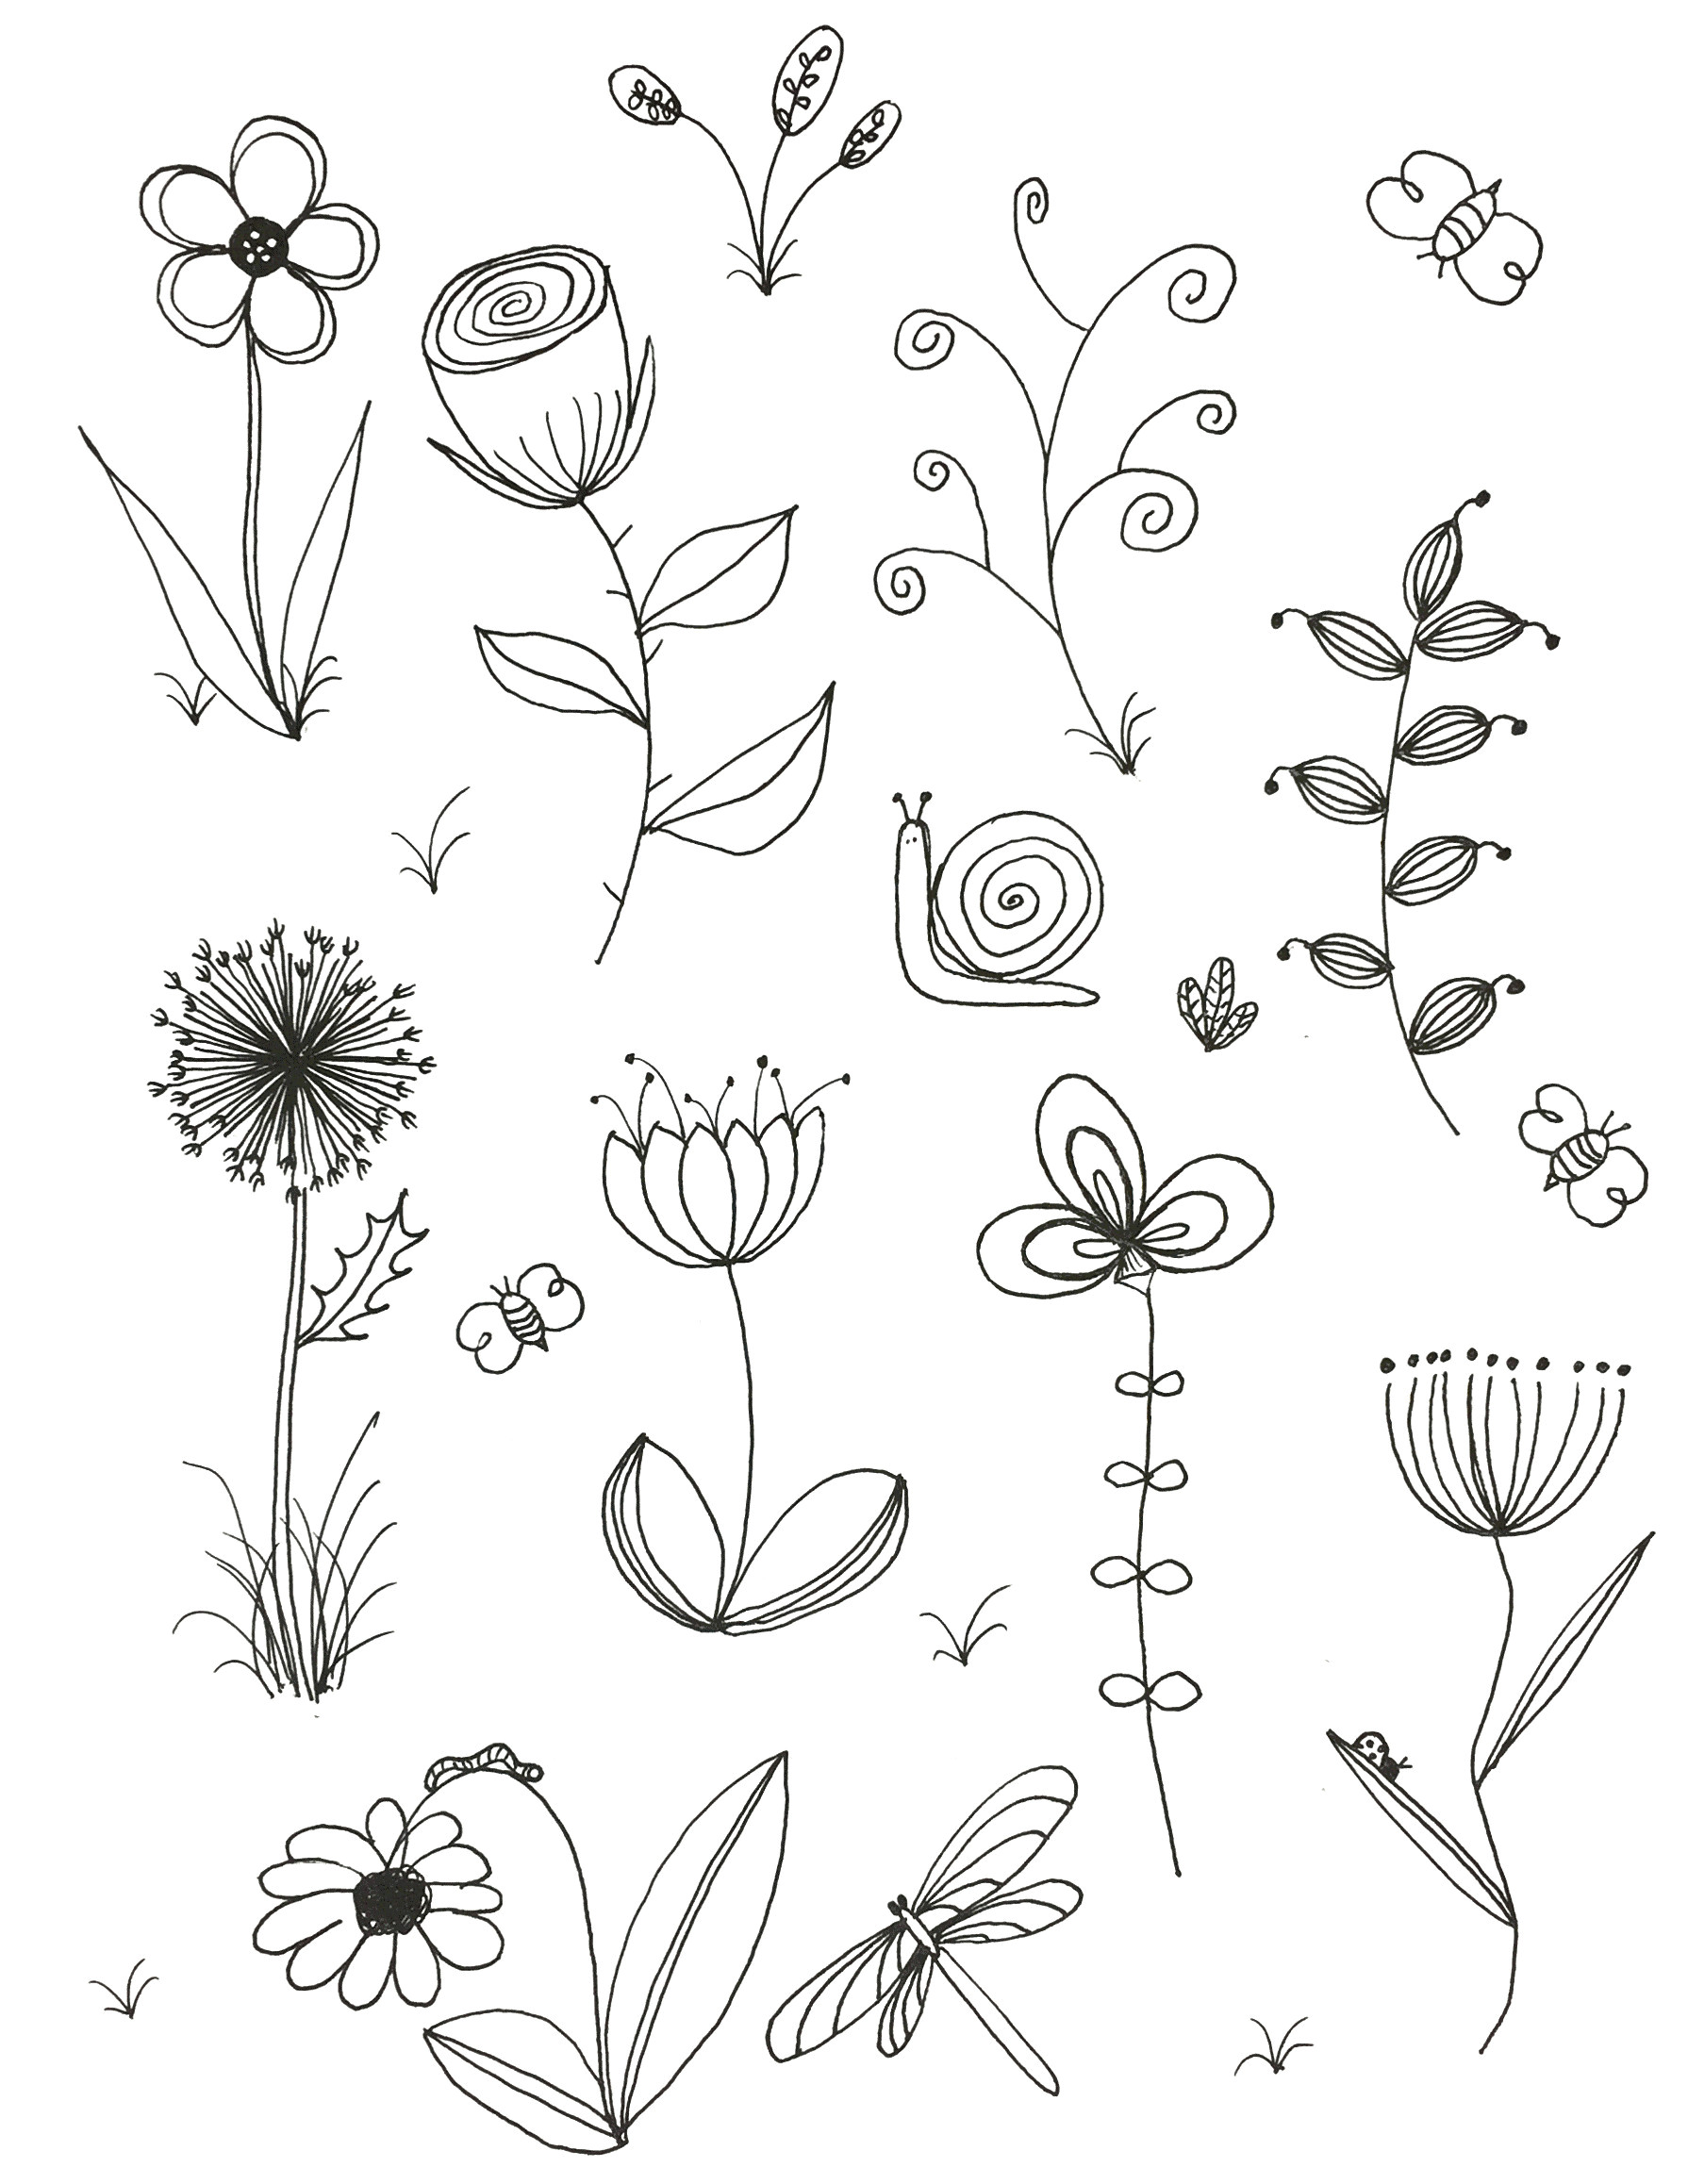 Simple Line Drawings Of Roses Easy to Draw Spring Pictures Spring Coloring Pages New Coloring